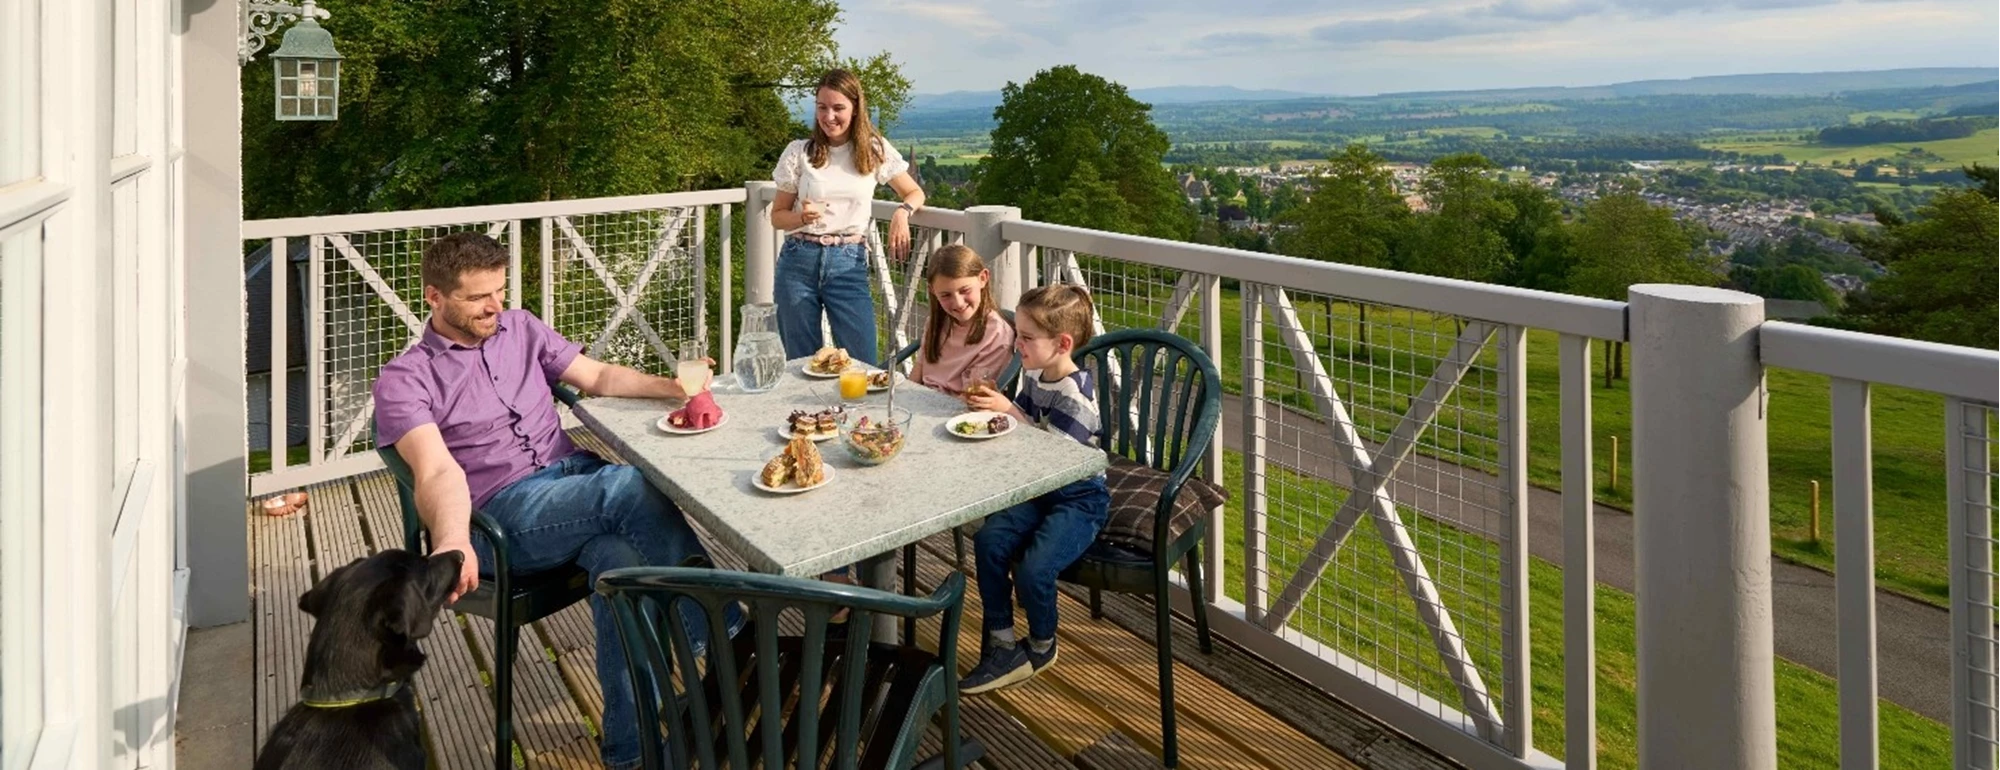 Family eating at self-catering